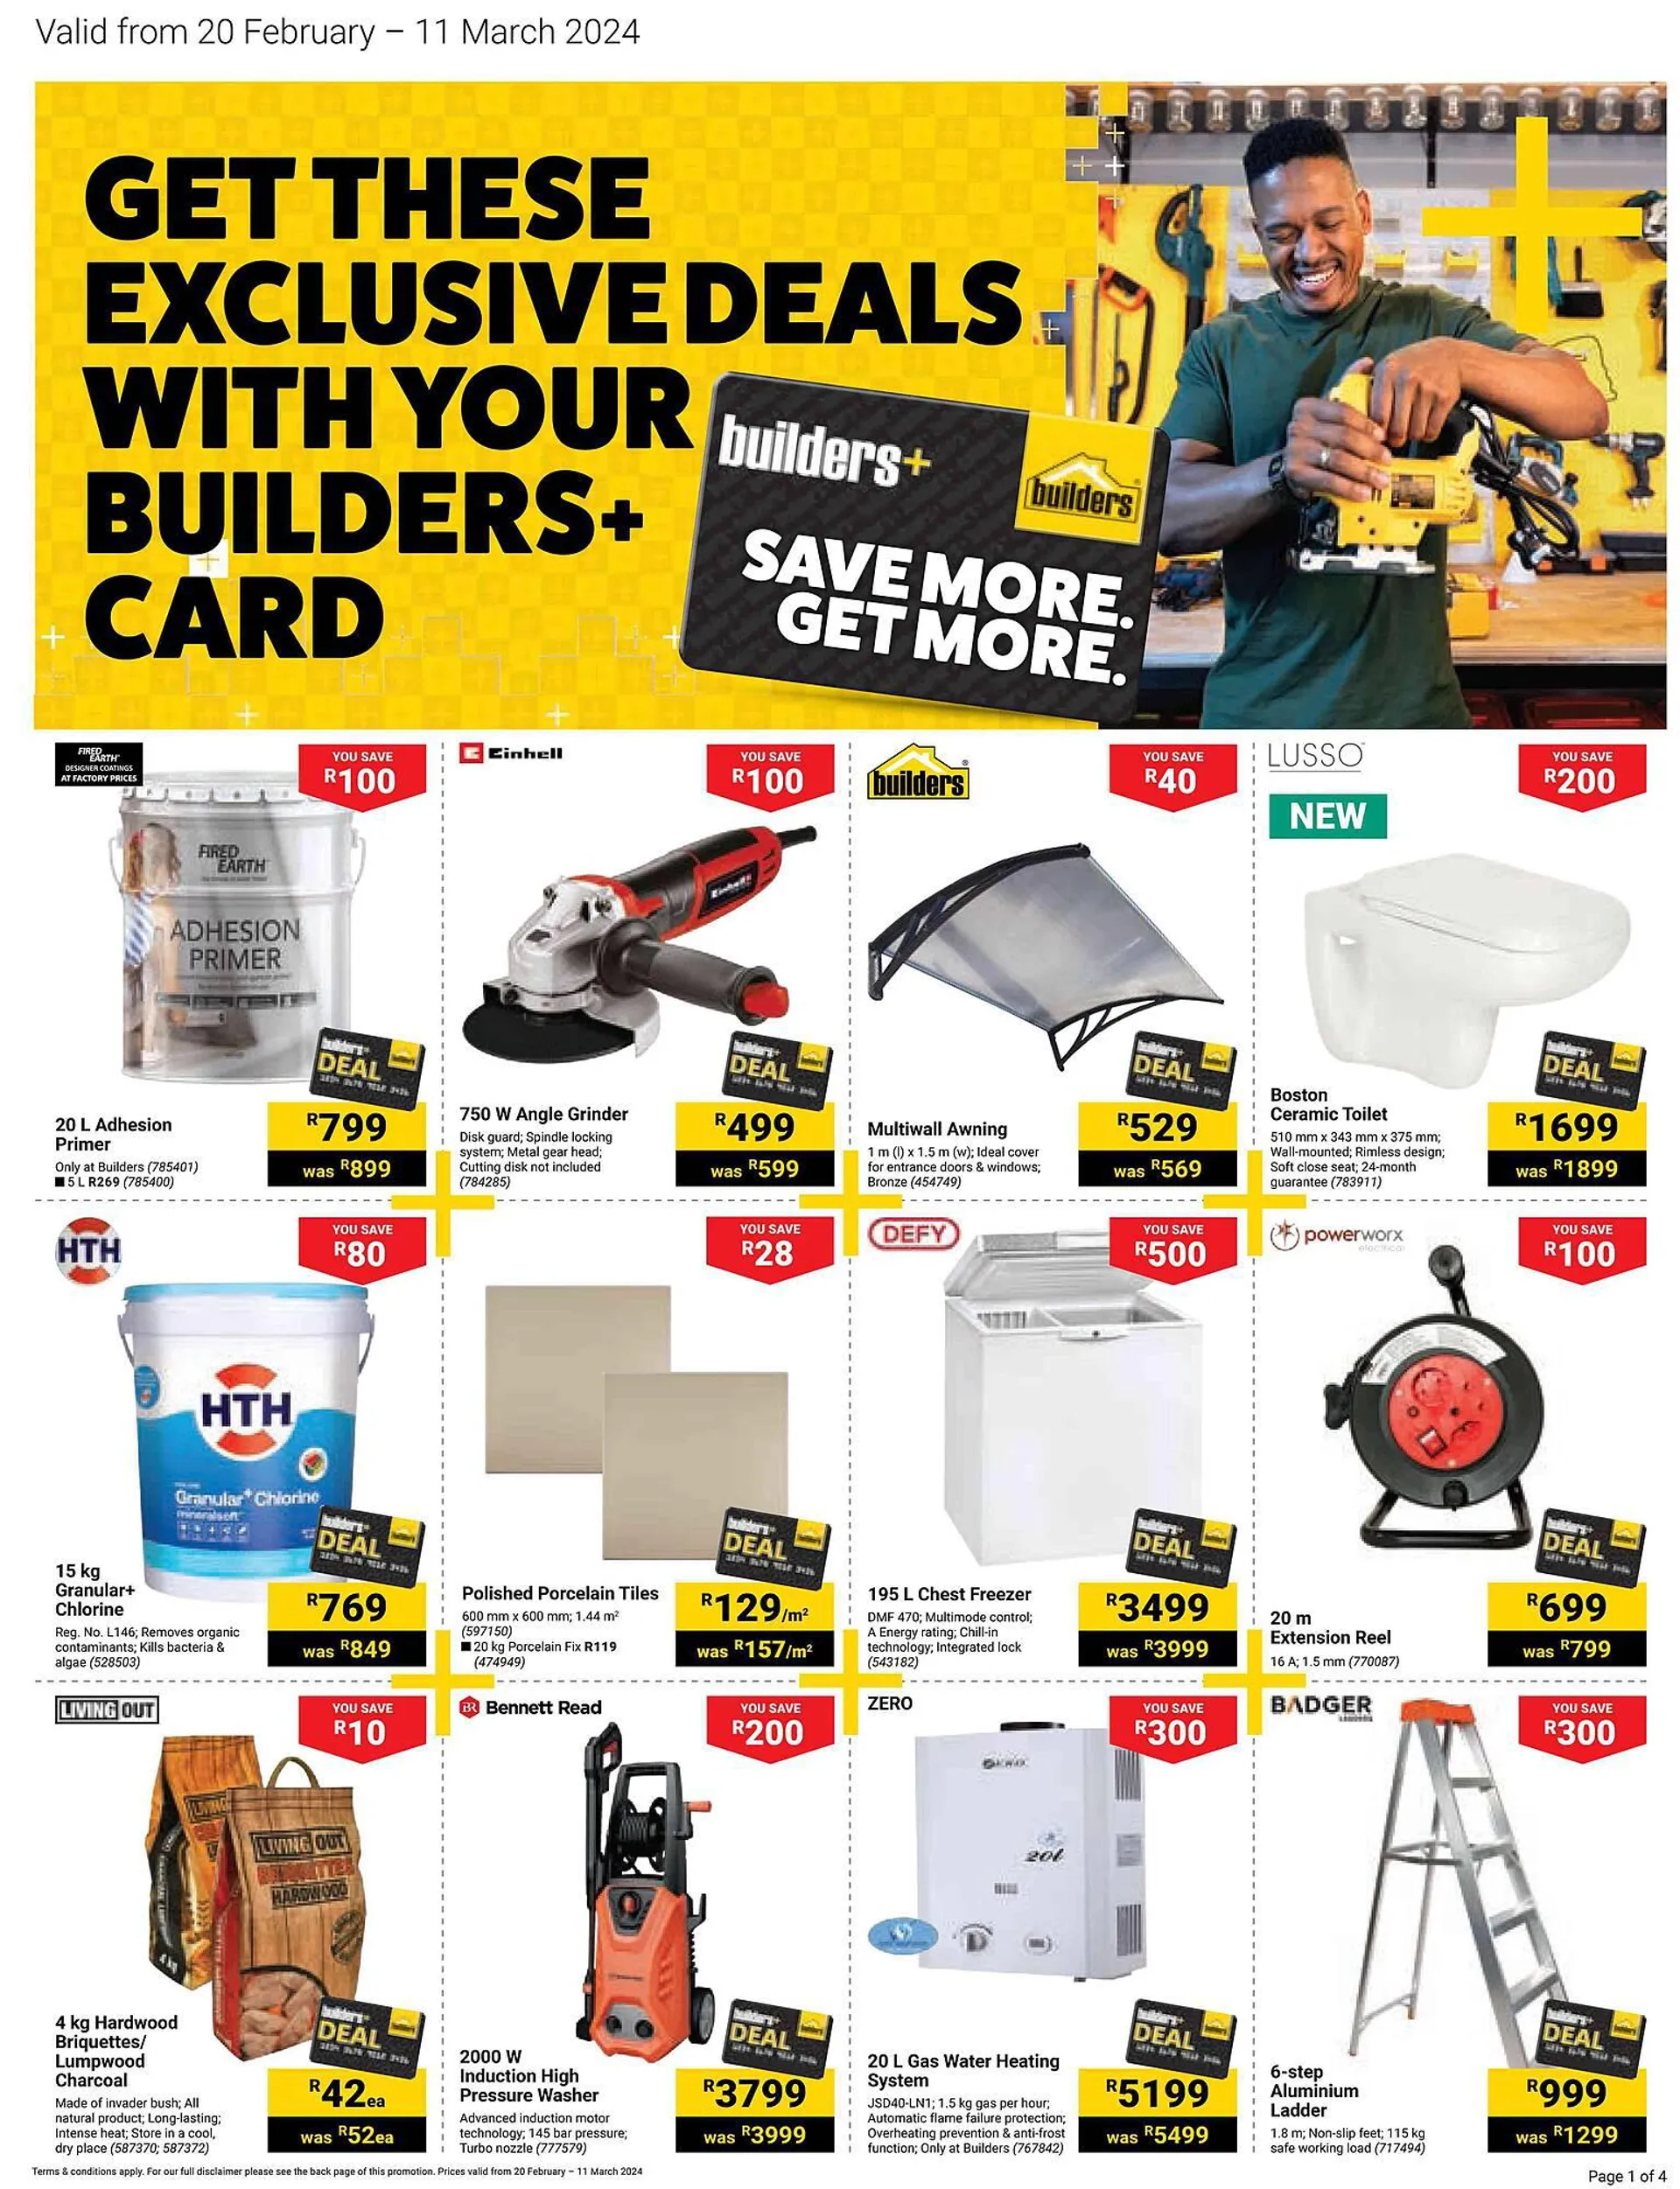 Builders Warehouse catalogue - 20 February 11 March 2024 - Page 1